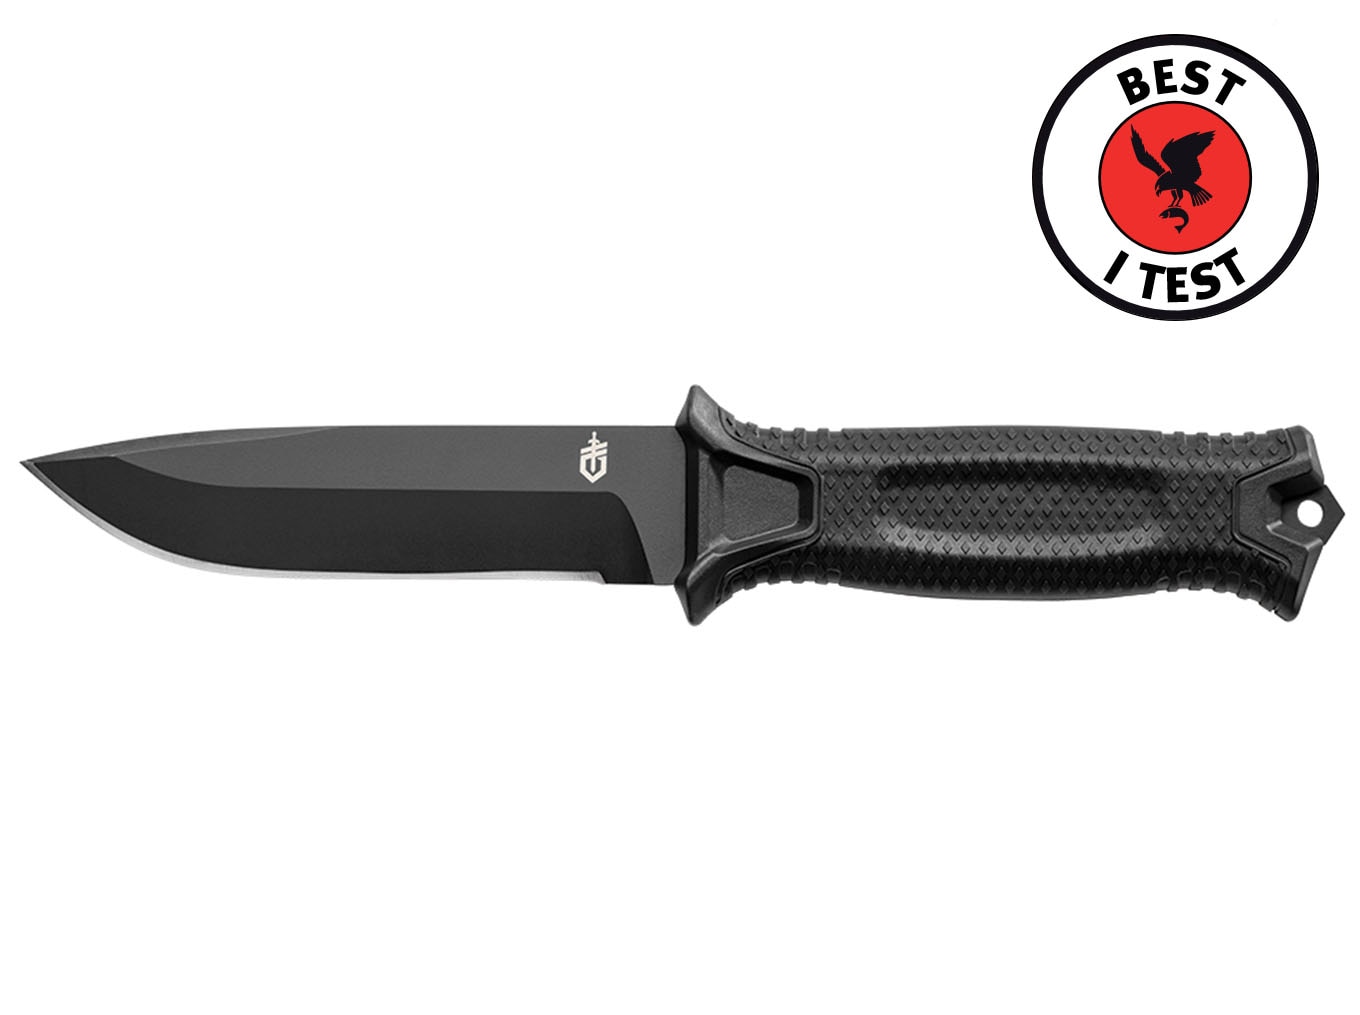 Gerber Strongarm fixed blade knife